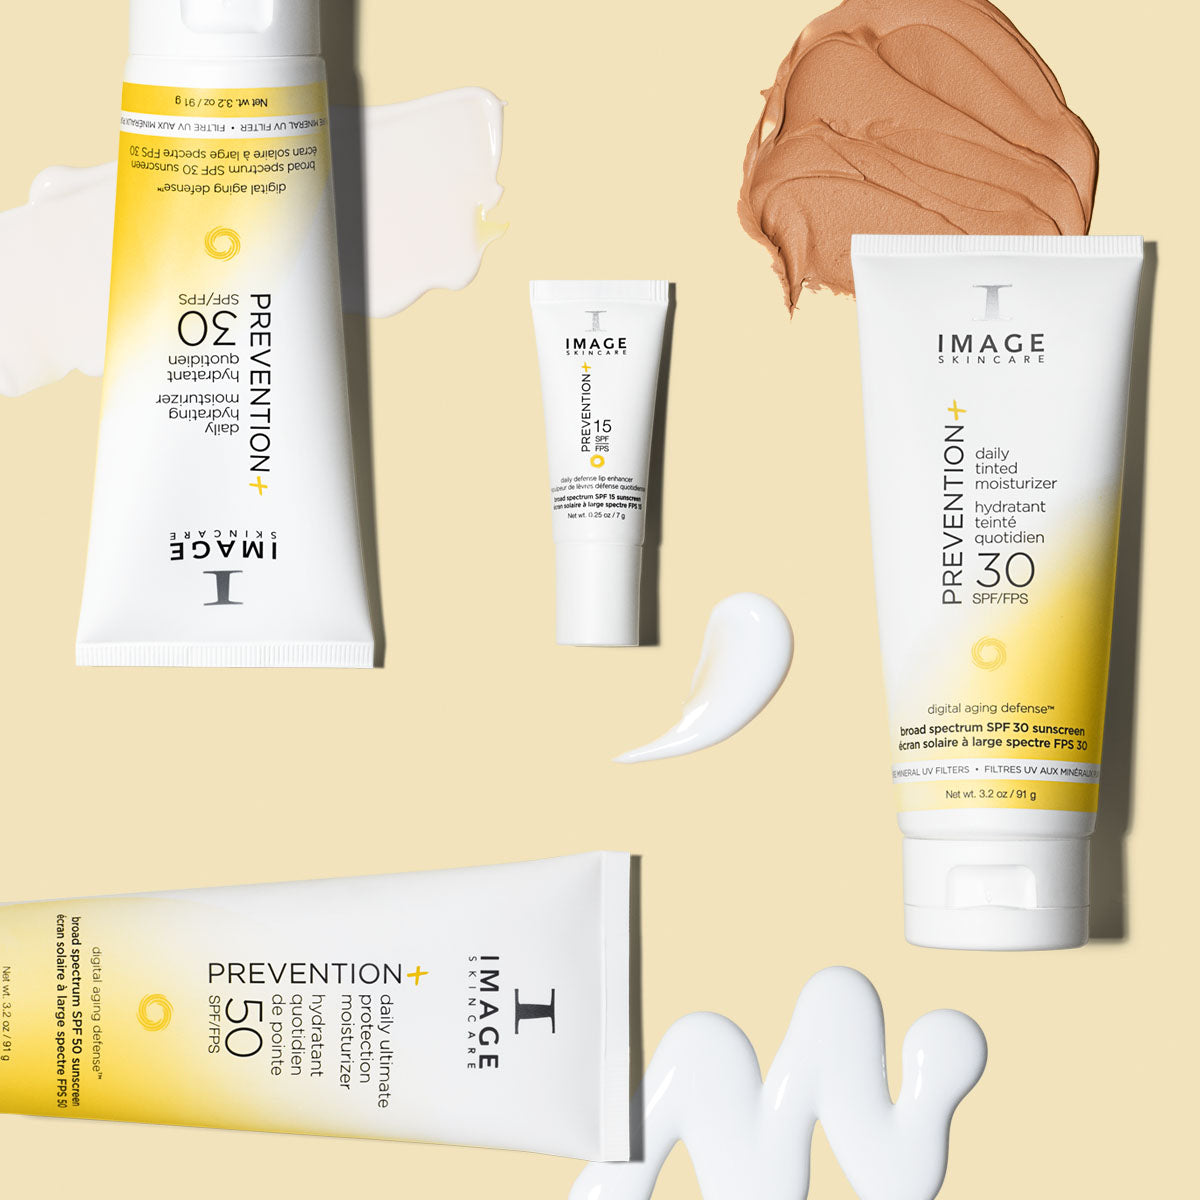 PREVENTION+® daily ultimate protection moisturizer SPF 50 | IMAGE Skincare